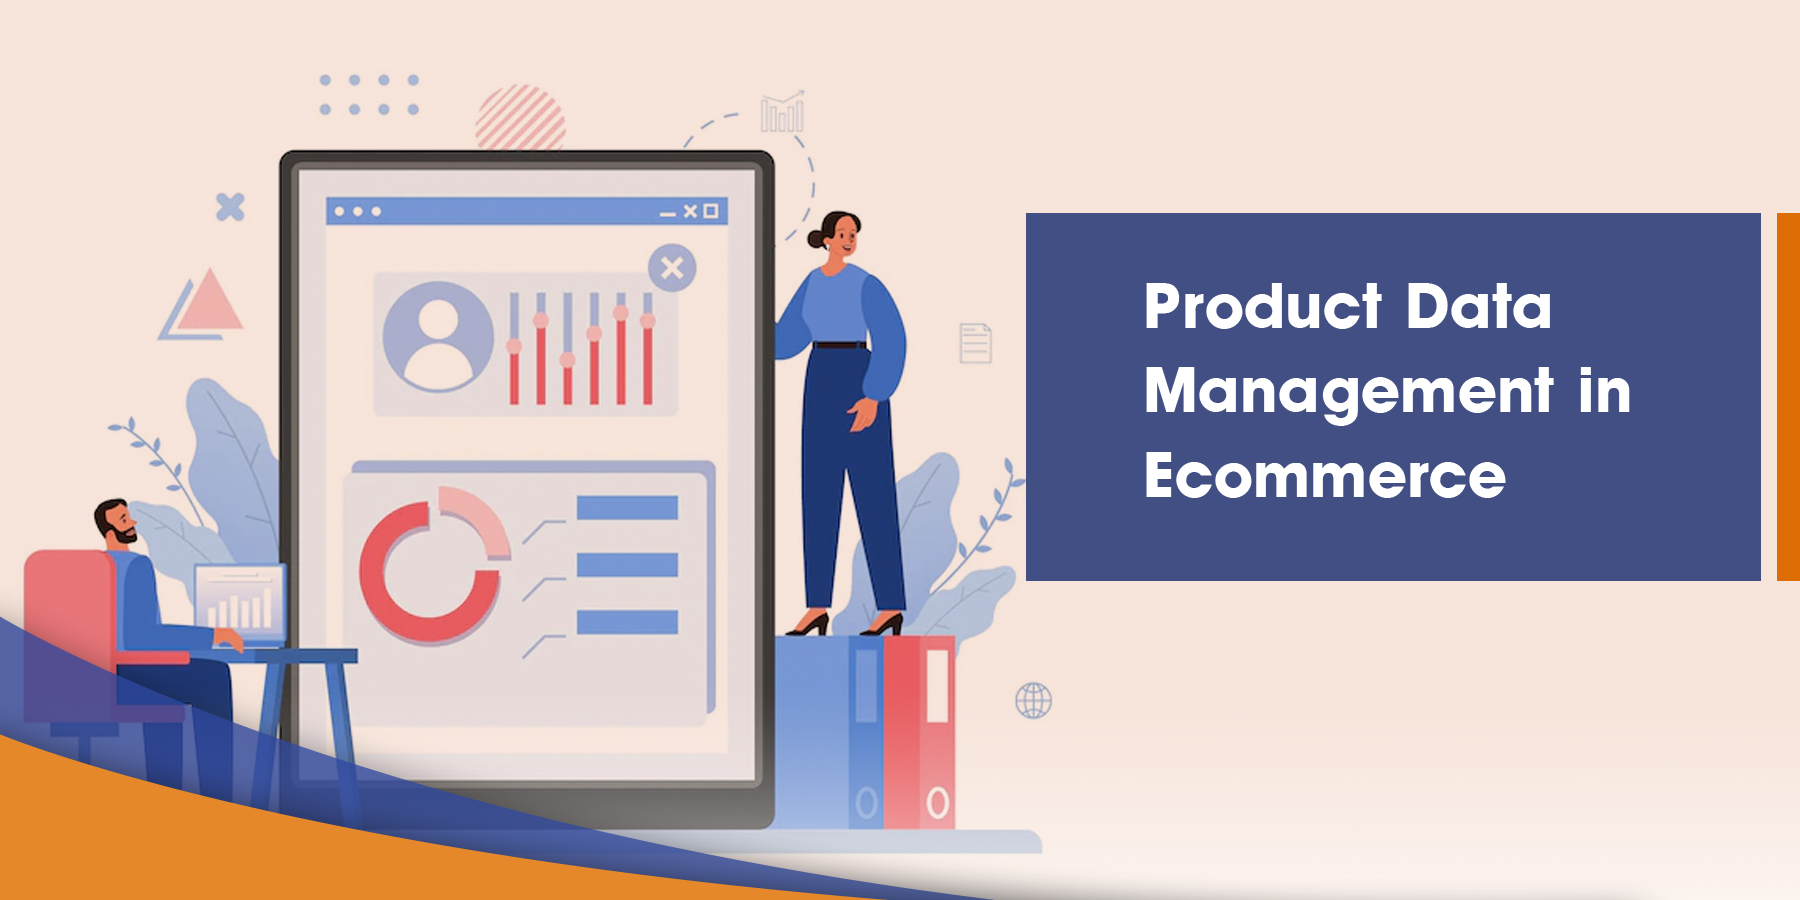 Product Data Management in Ecommerce